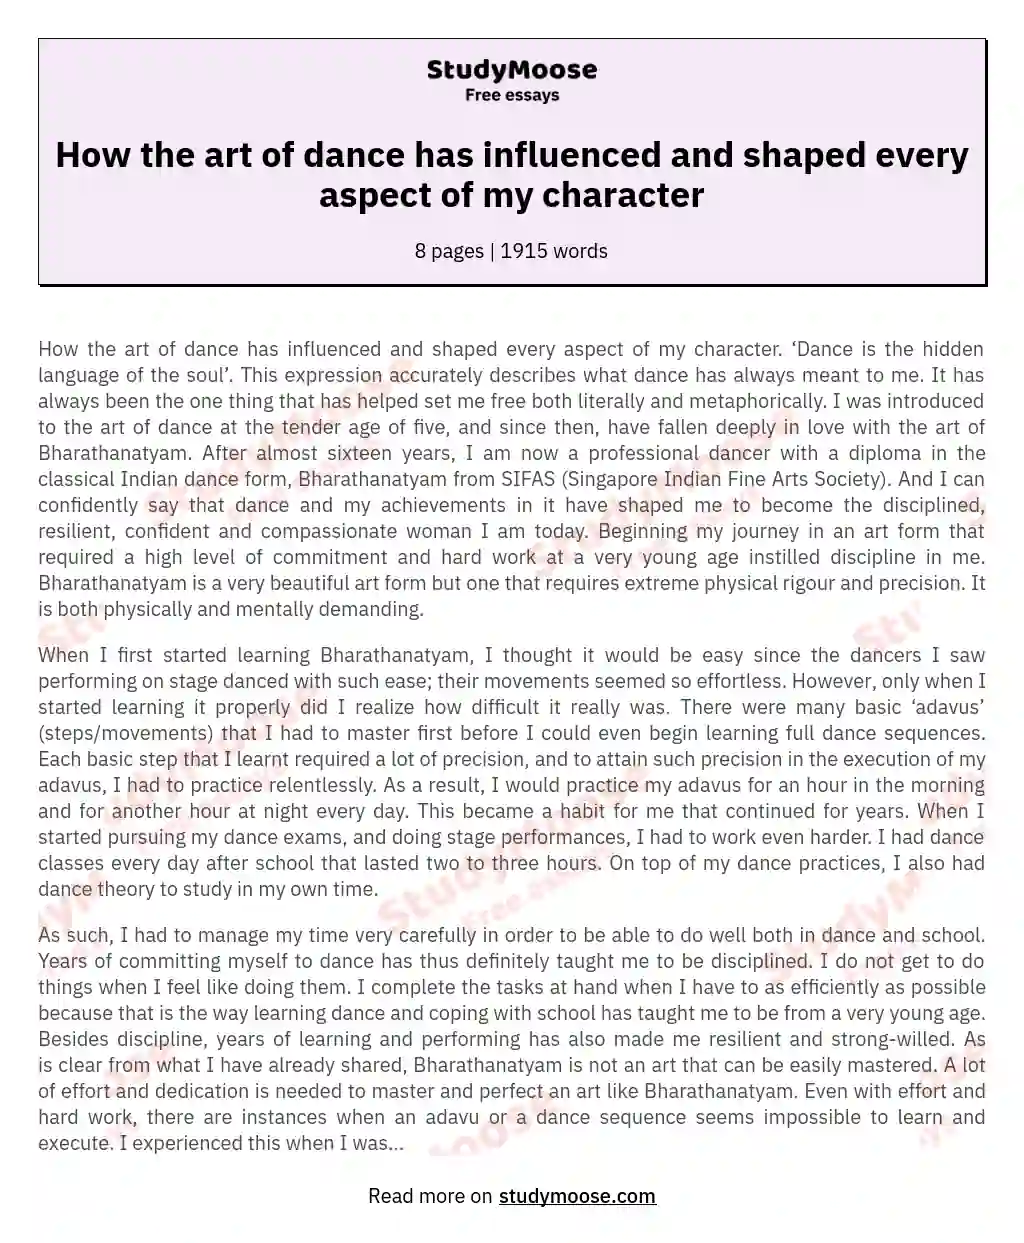 How the art of dance has influenced and shaped every aspect of my character essay